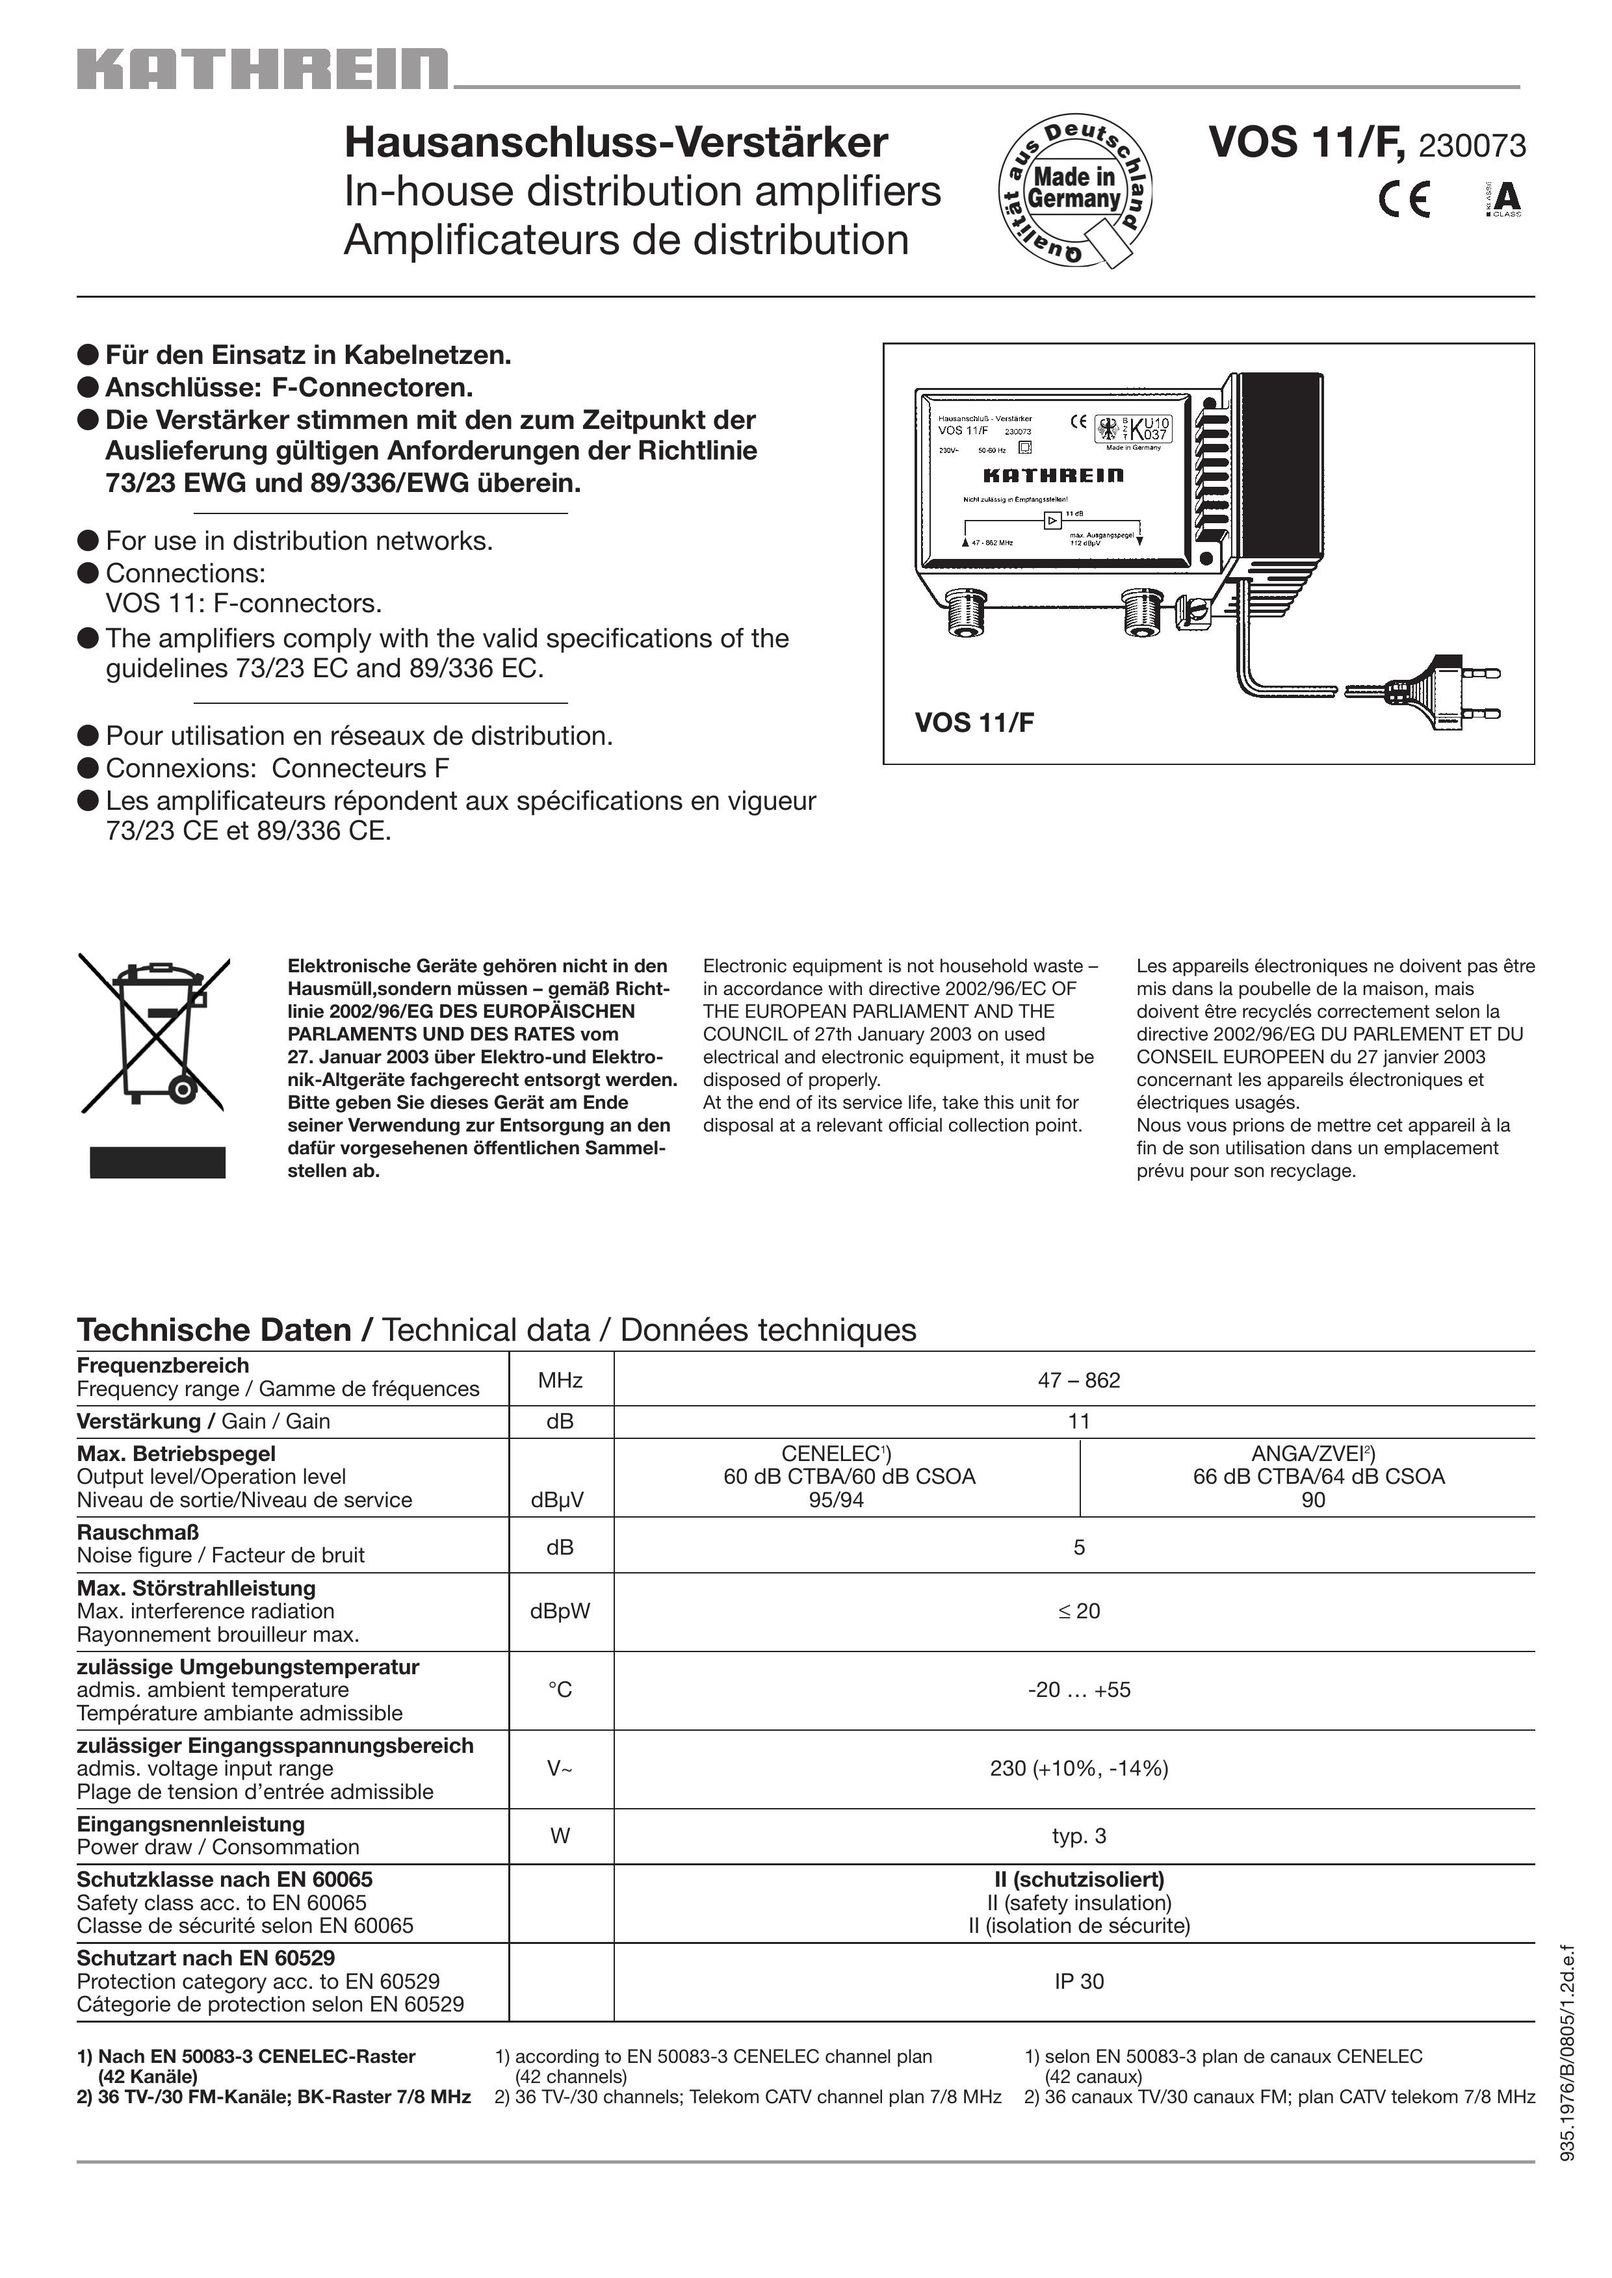 Kathrein VOS 11 Stereo Amplifier User Manual